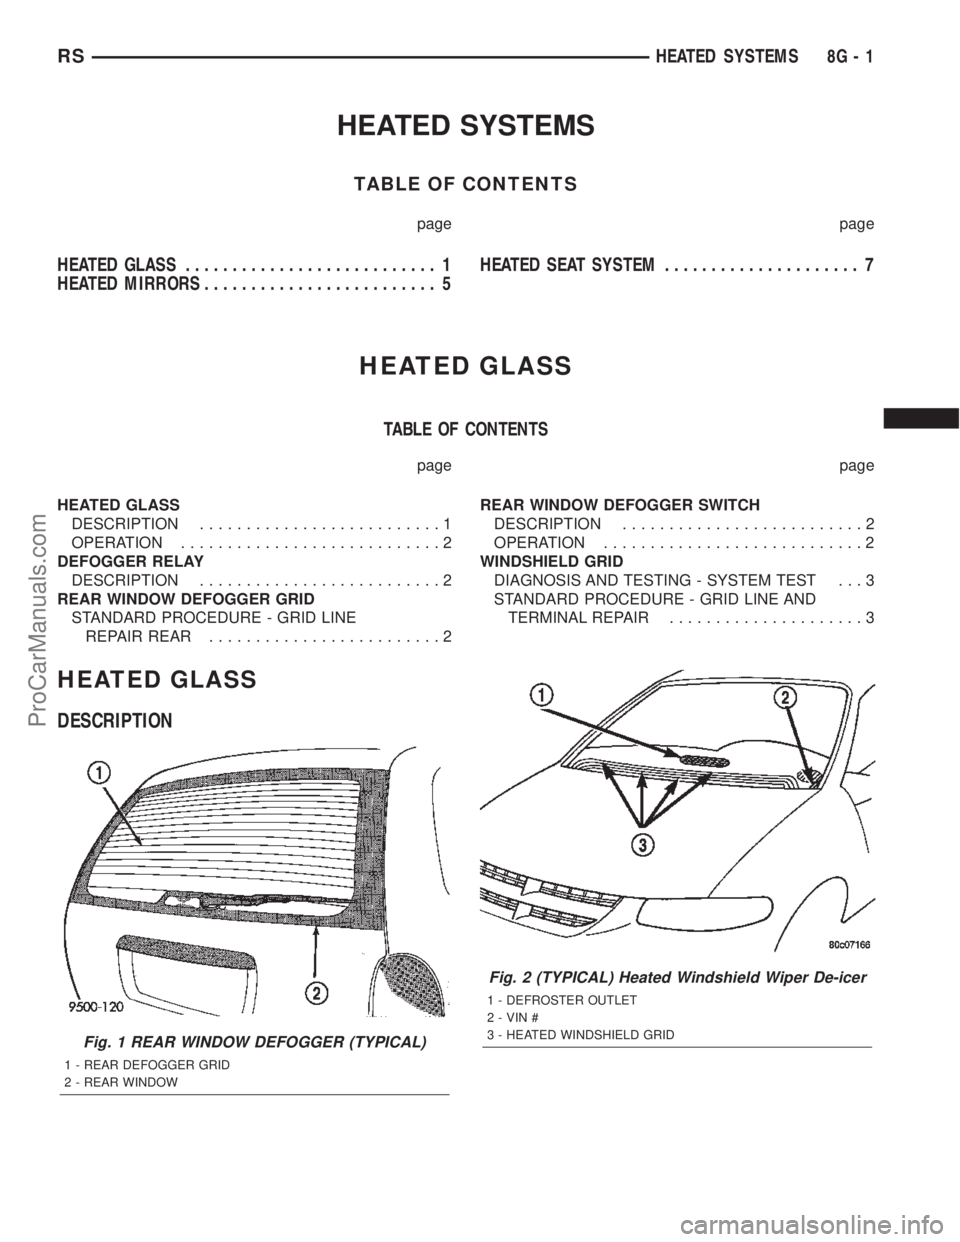 DODGE TOWN AND COUNTRY 2002  Service Manual HEATED SYSTEMS
TABLE OF CONTENTS
page page
HEATED GLASS........................... 1
HEATED MIRRORS......................... 5HEATED SEAT SYSTEM..................... 7
HEATED GLASS
TABLE OF CONTENTS
p